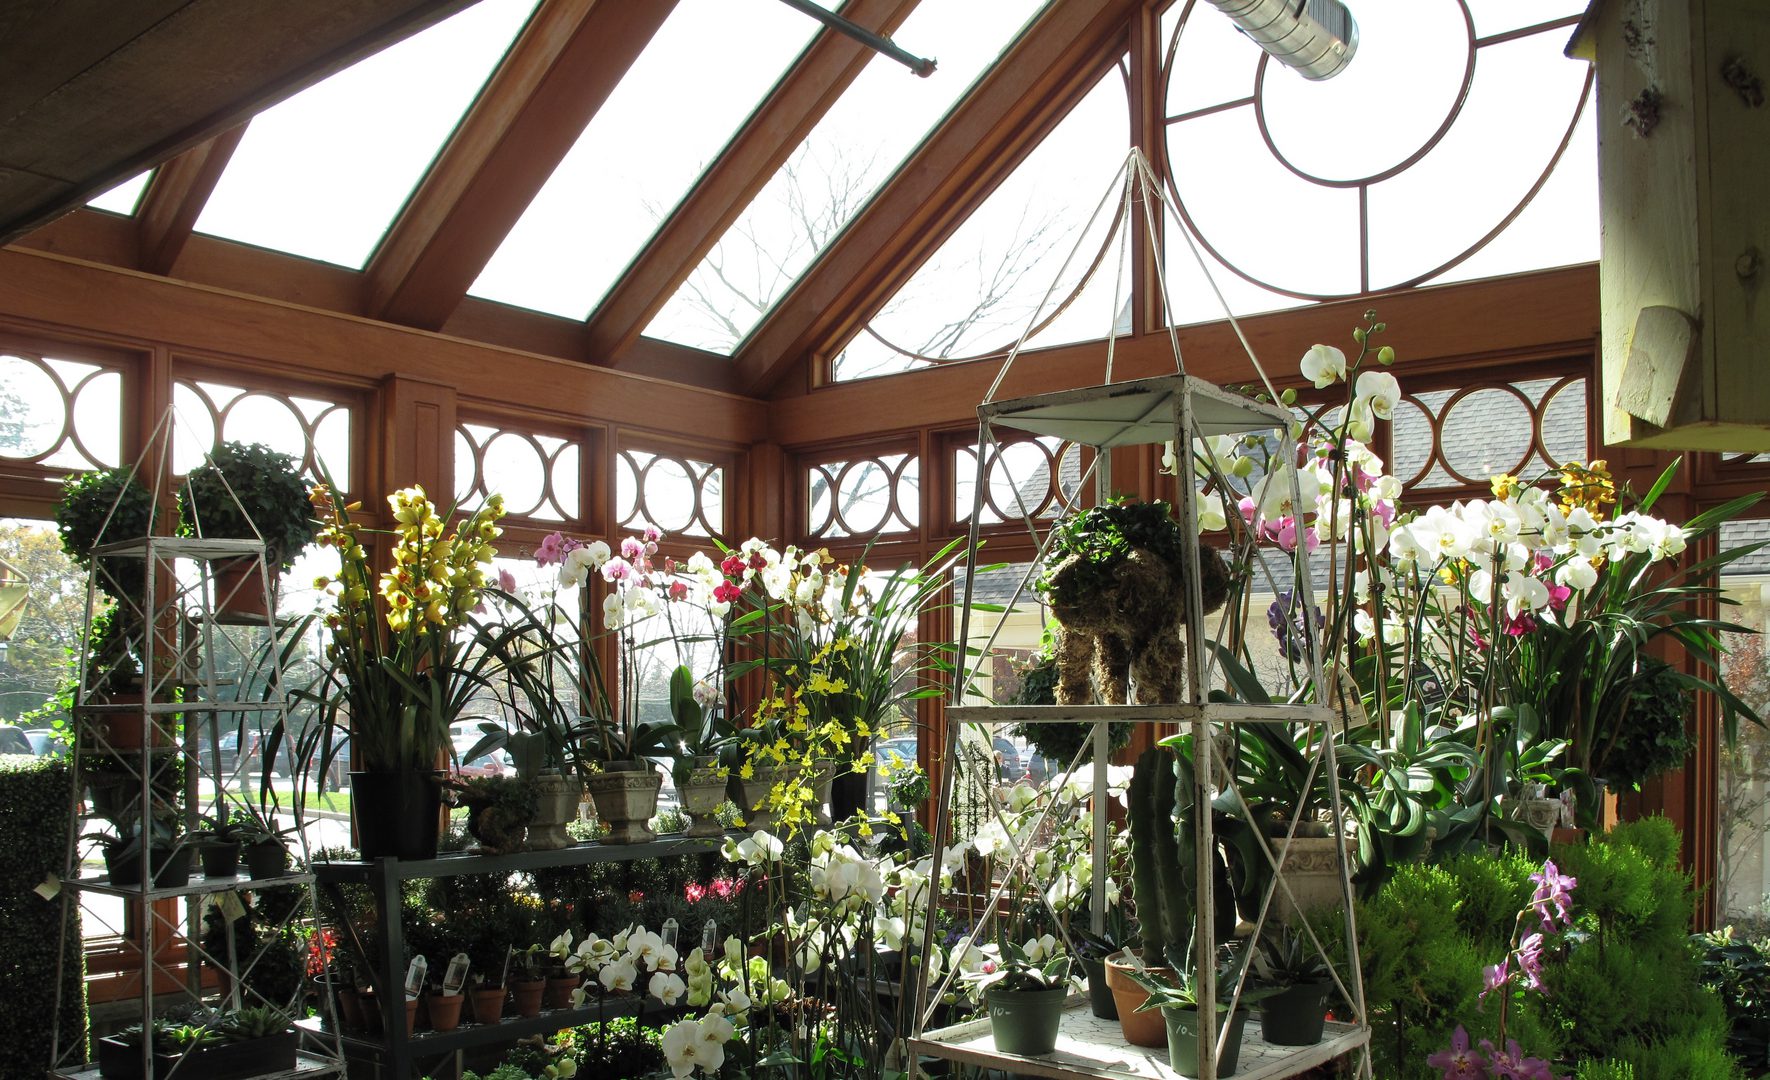 A room filled with lots of plants and flowers.